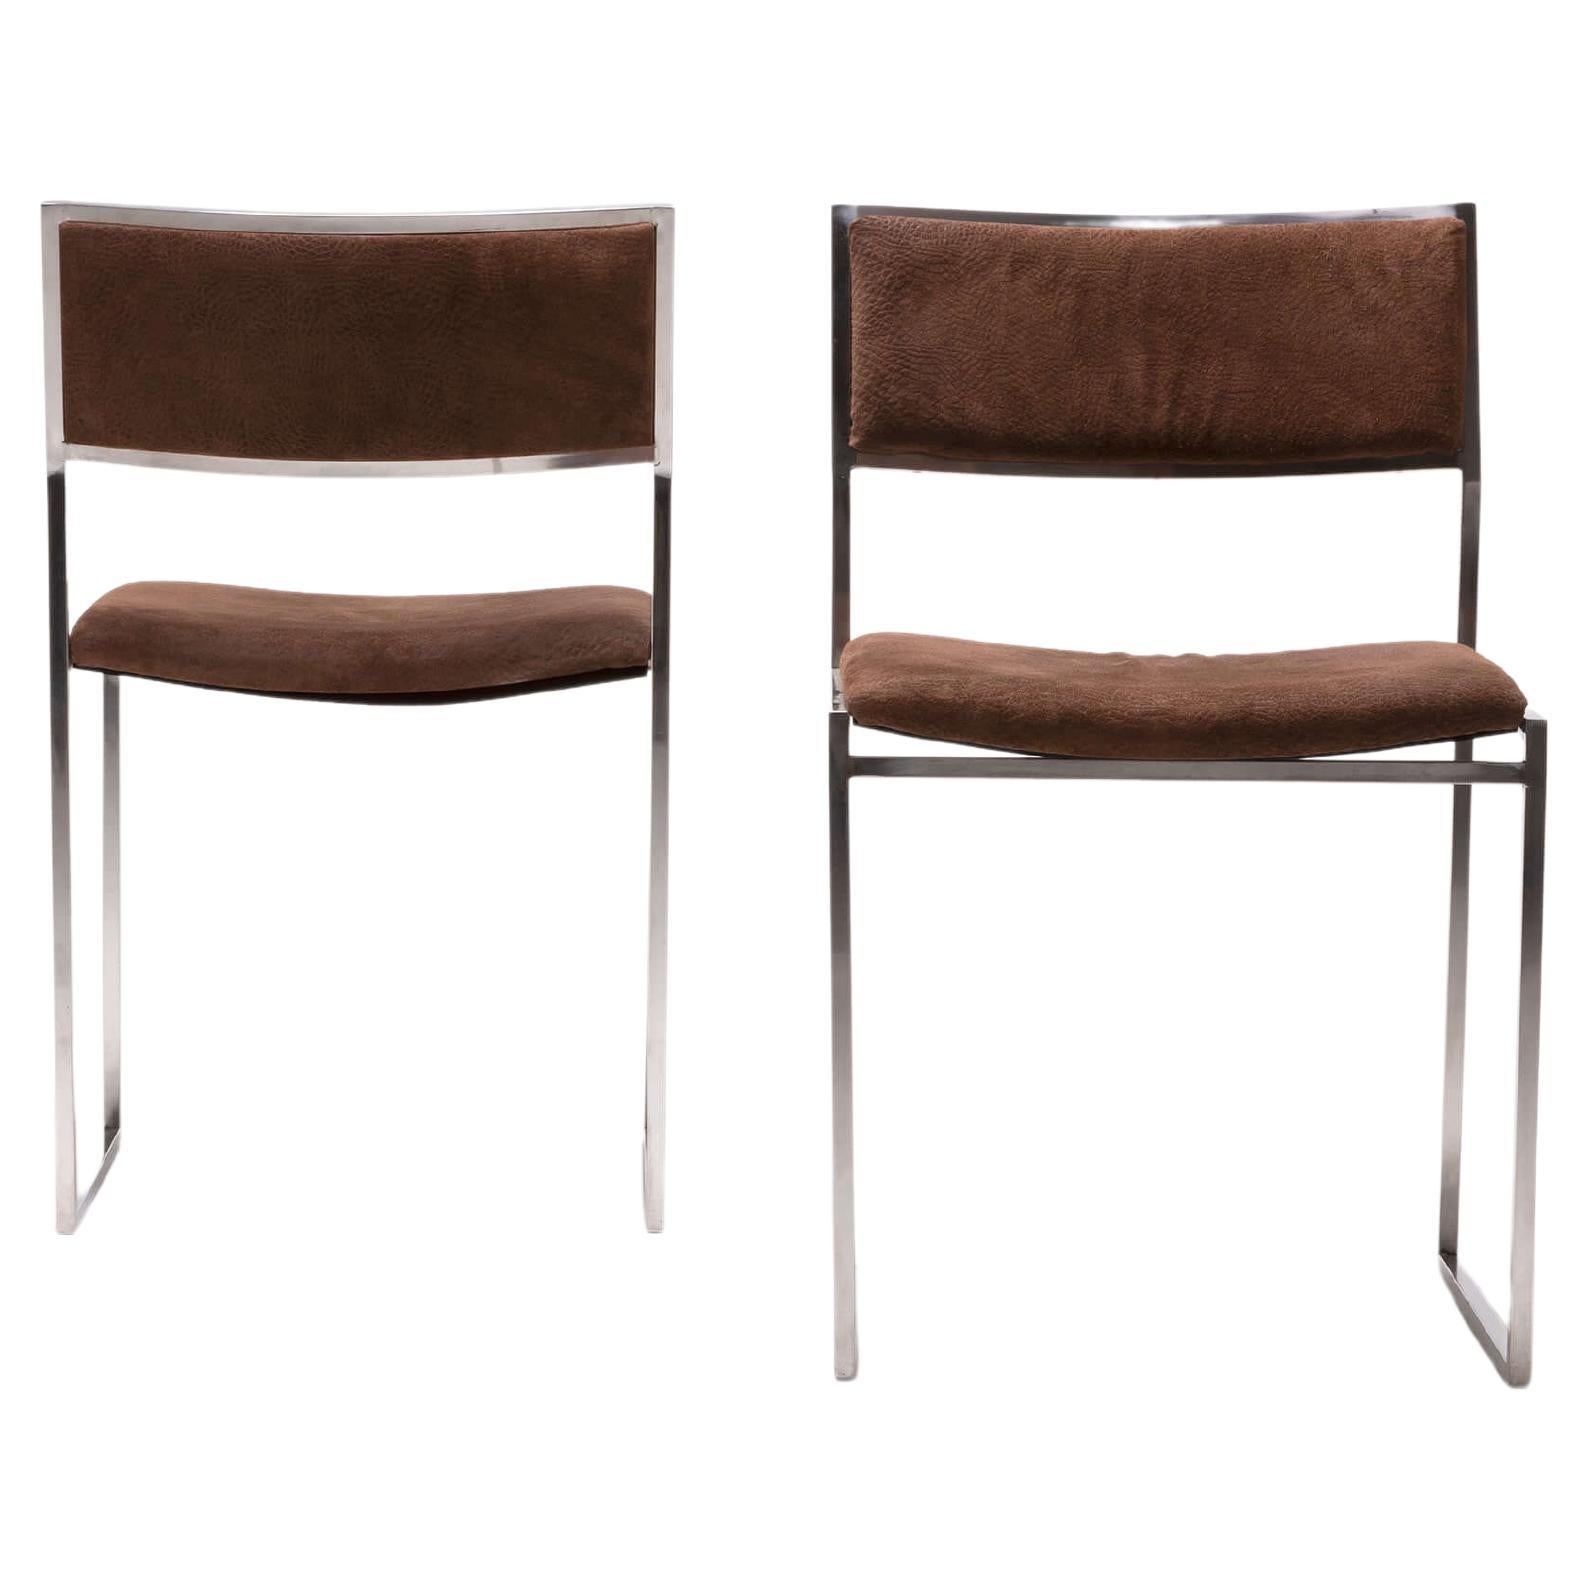 Willy Rizzo Peccary Leather SQ Chairs with Stainless Steel Structure, circa 1970 For Sale